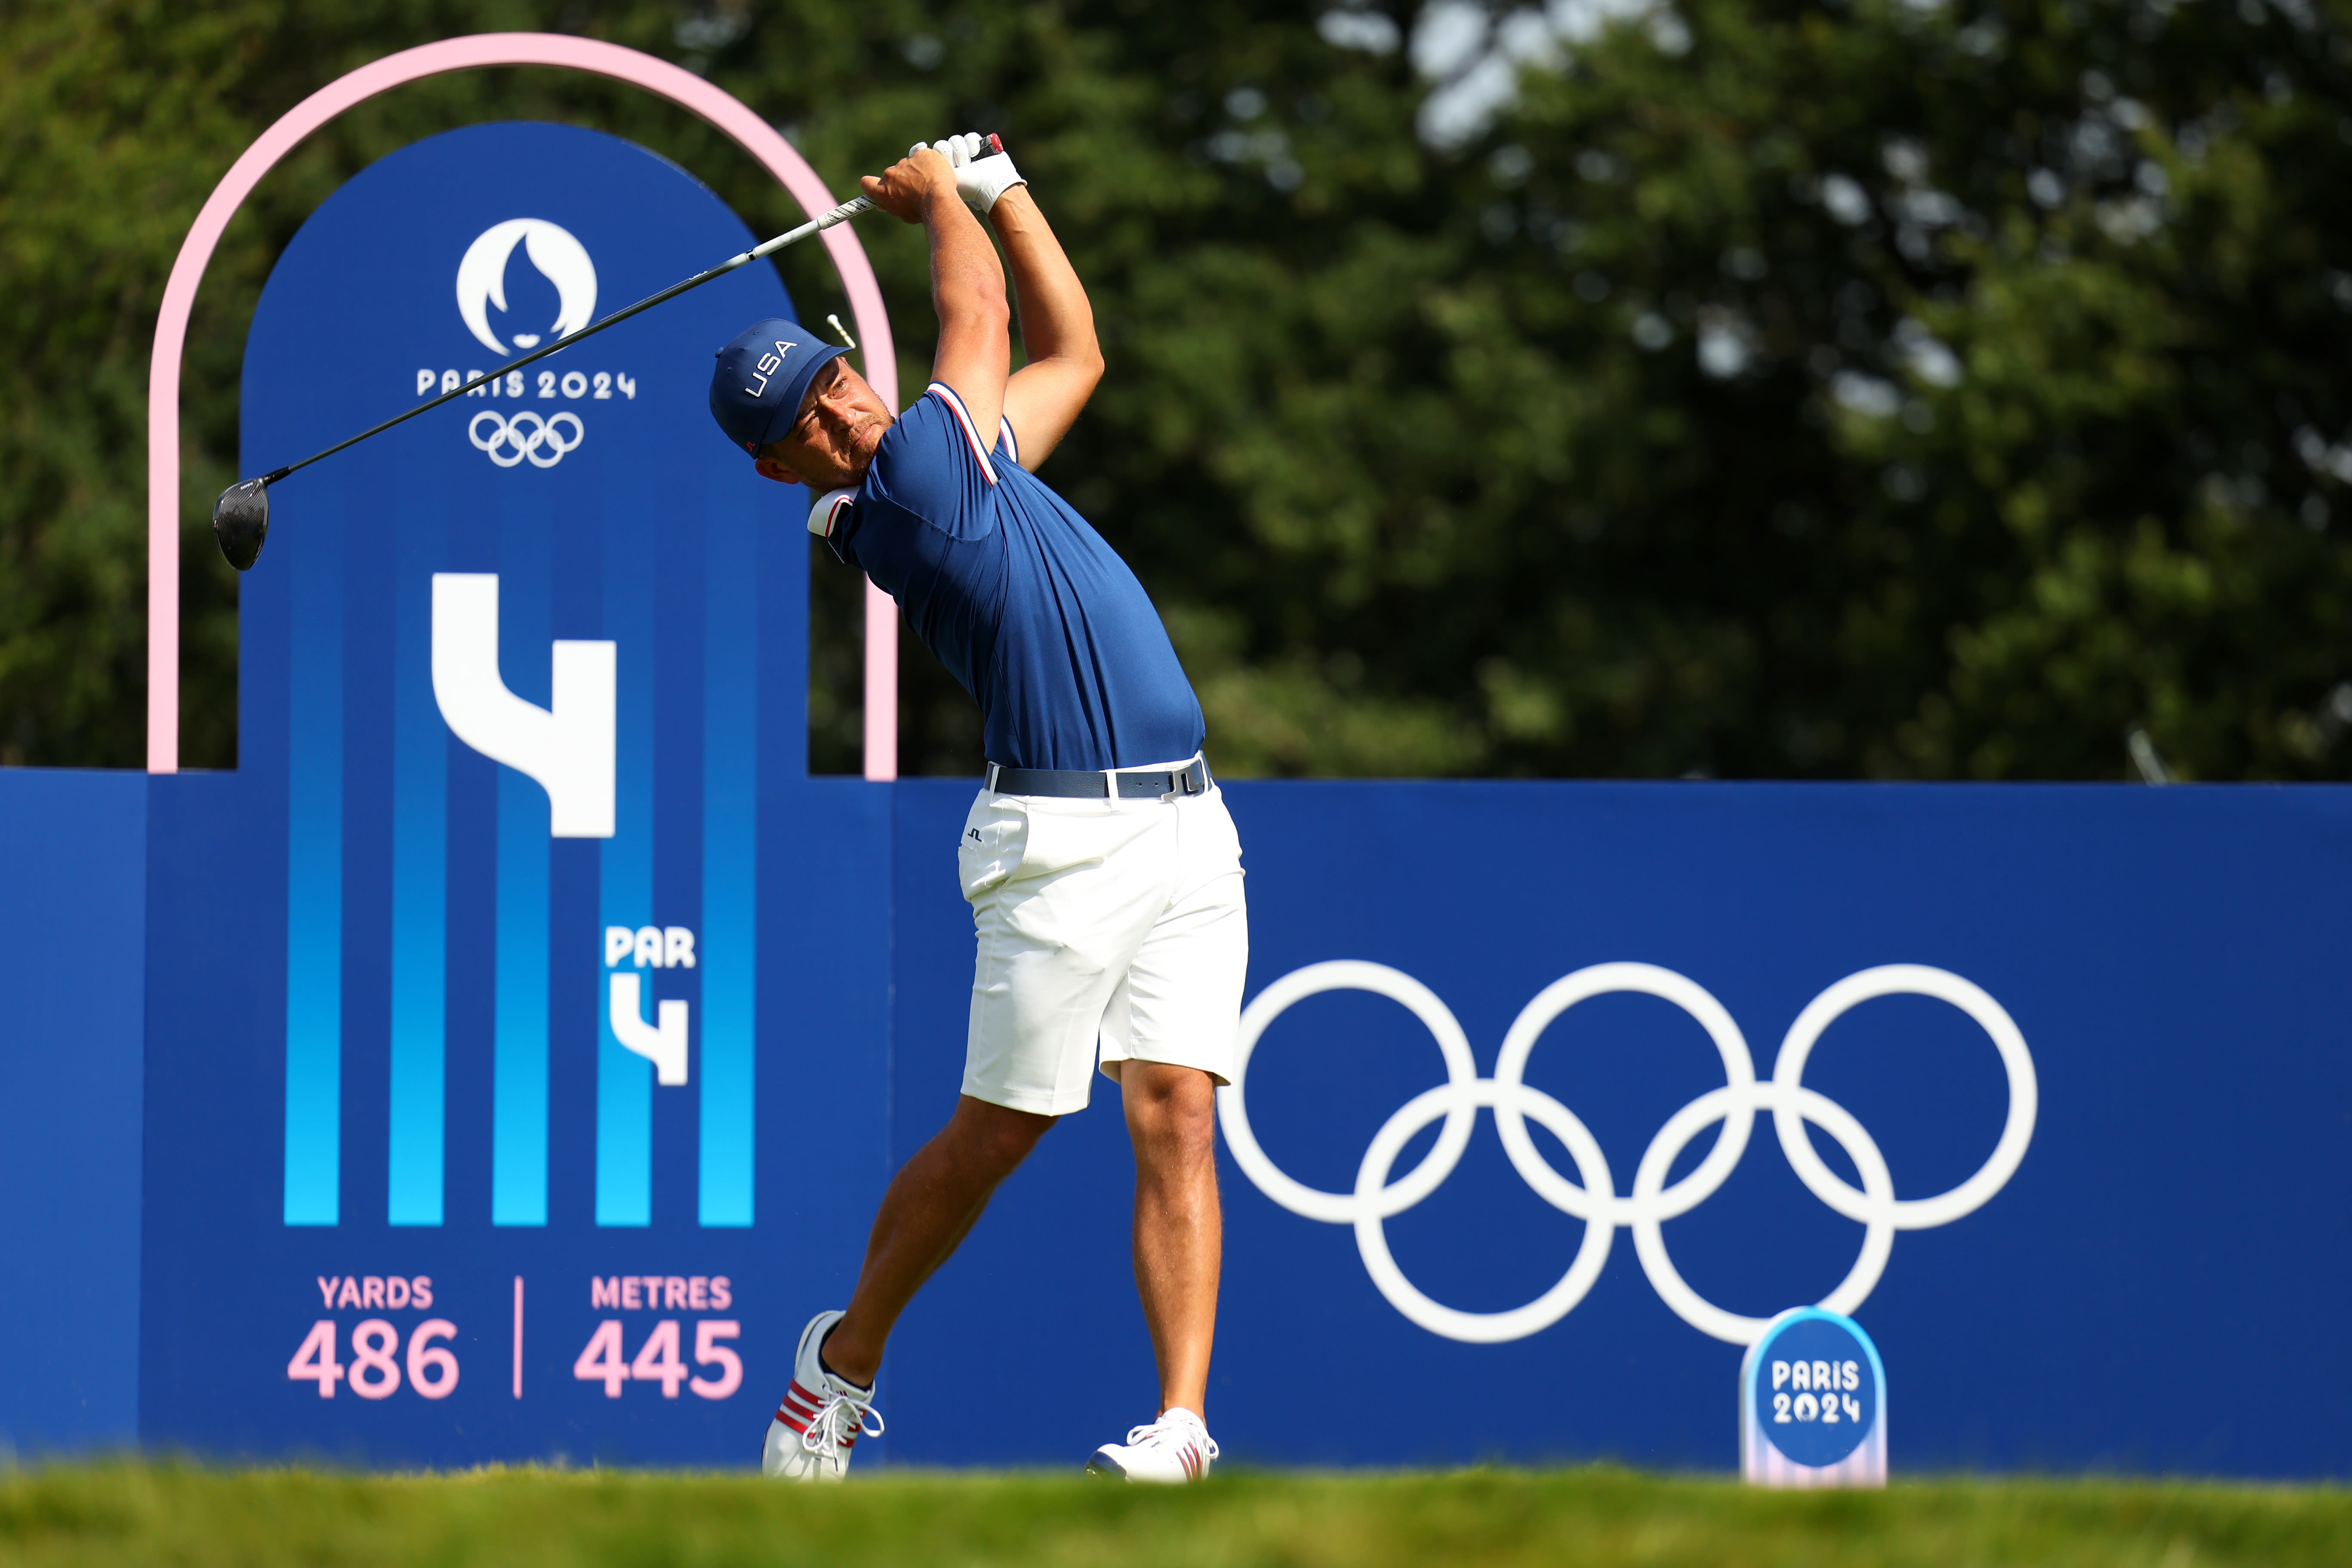 2024 Olympic golf: Tee times announced for Rounds 1-2 as Xander Schauffele begins gold medal defense